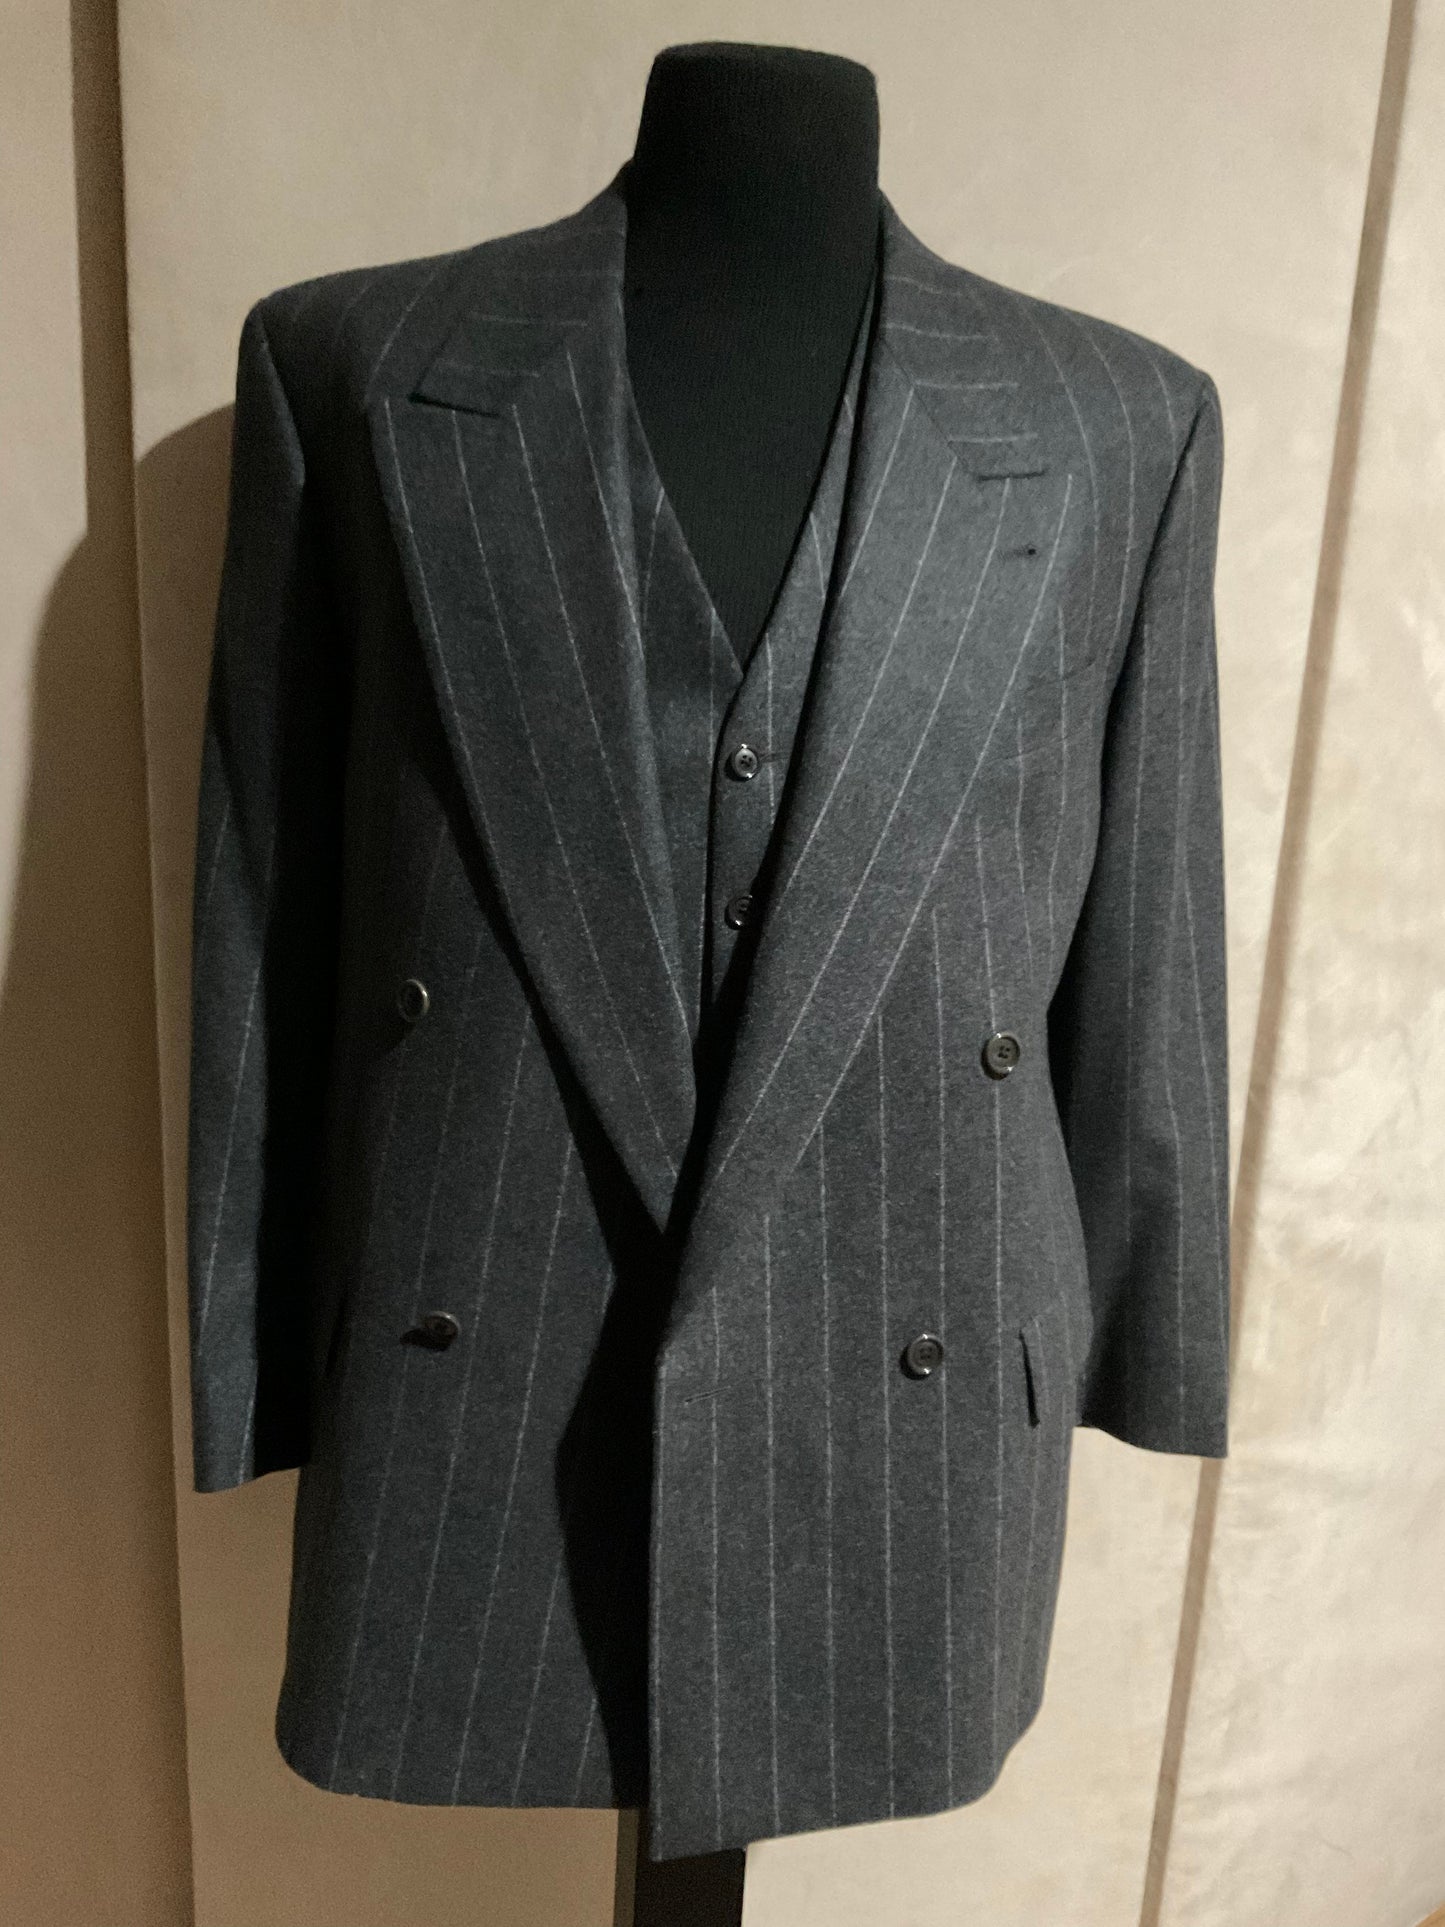 R P SUIT / PURE CASHMERE / DOUBLE BREASTED & VEST / CUSTOM BESPOKE / GREY CHALK STRIPE / 40 REG / MADE IN ITALY